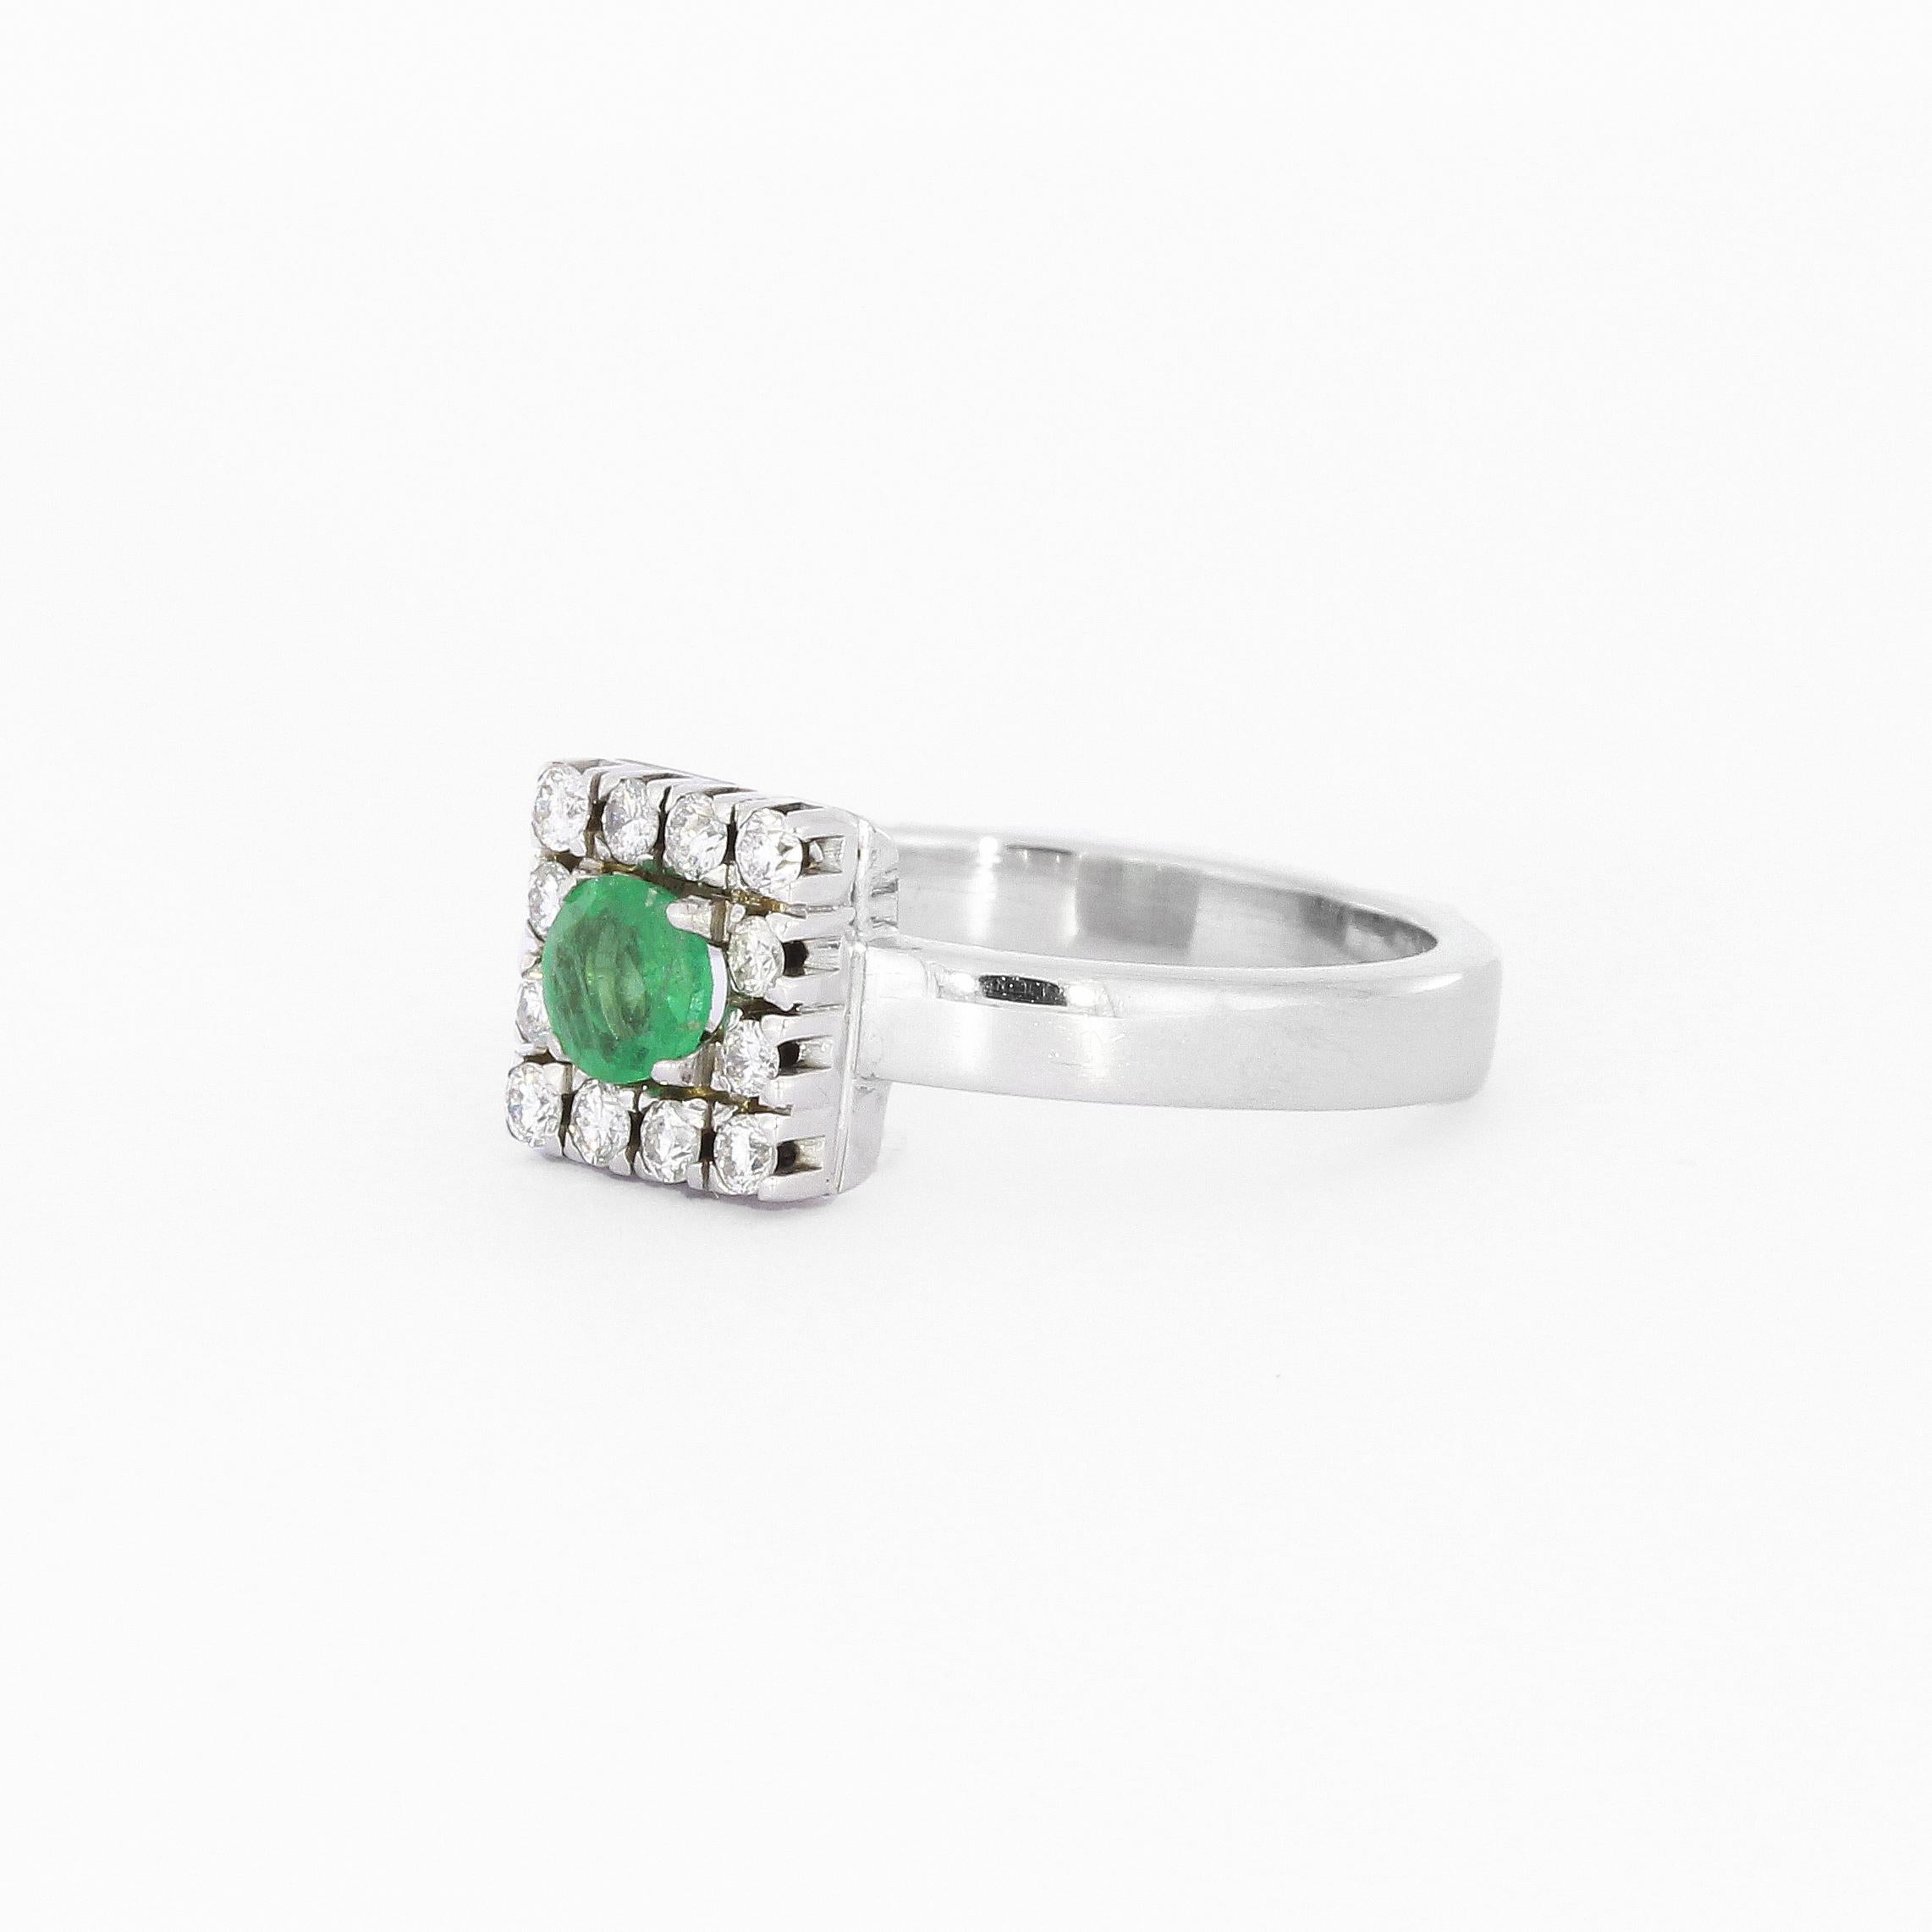 Emerald Diamond Ring In 18k White Gold with 12 Diamonds and one Emerald